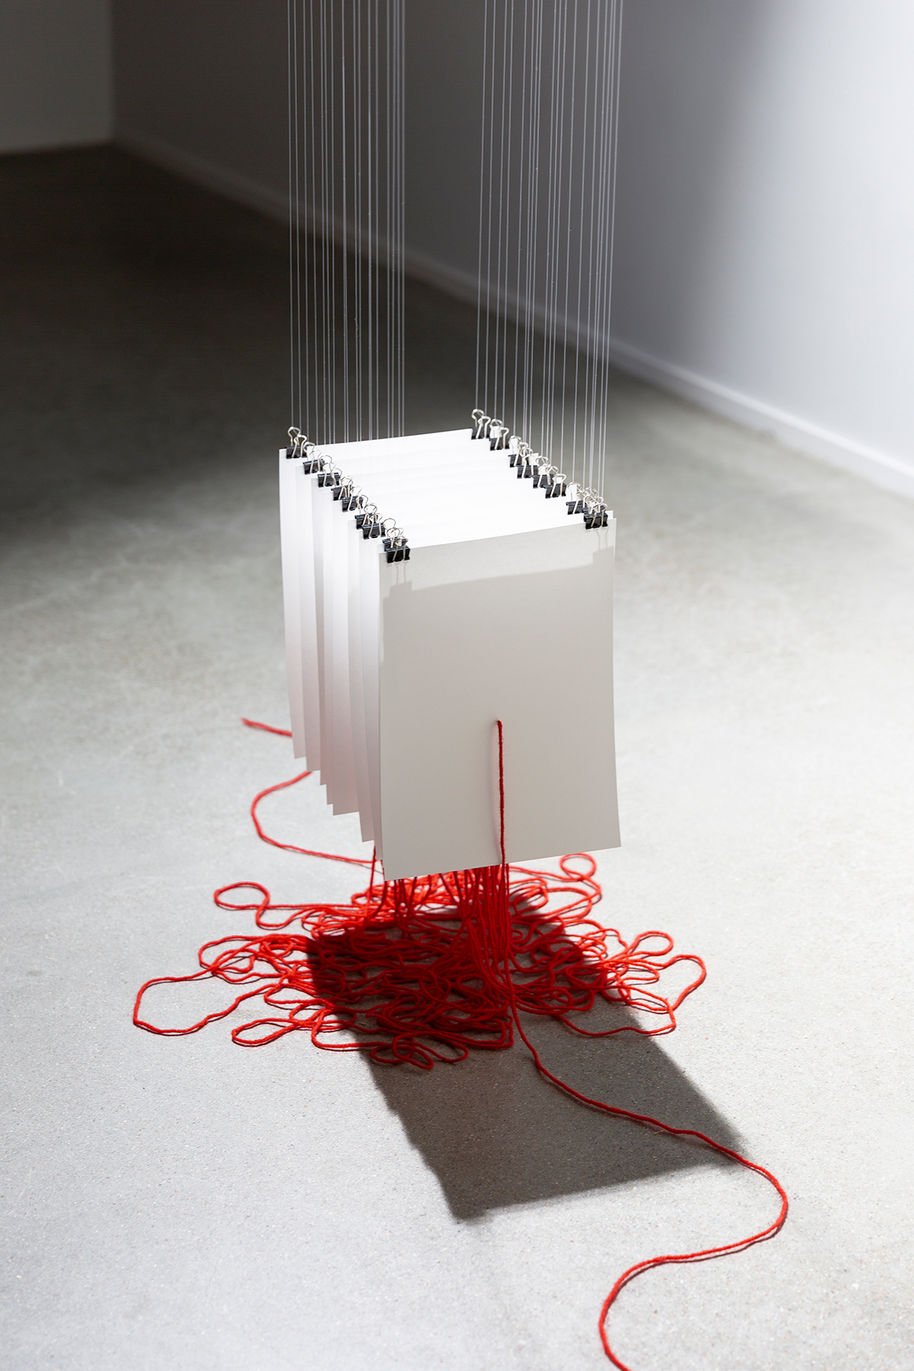 Installation made up of hanging pieces of white paper being pierced by a long, red string that piles up underneath.